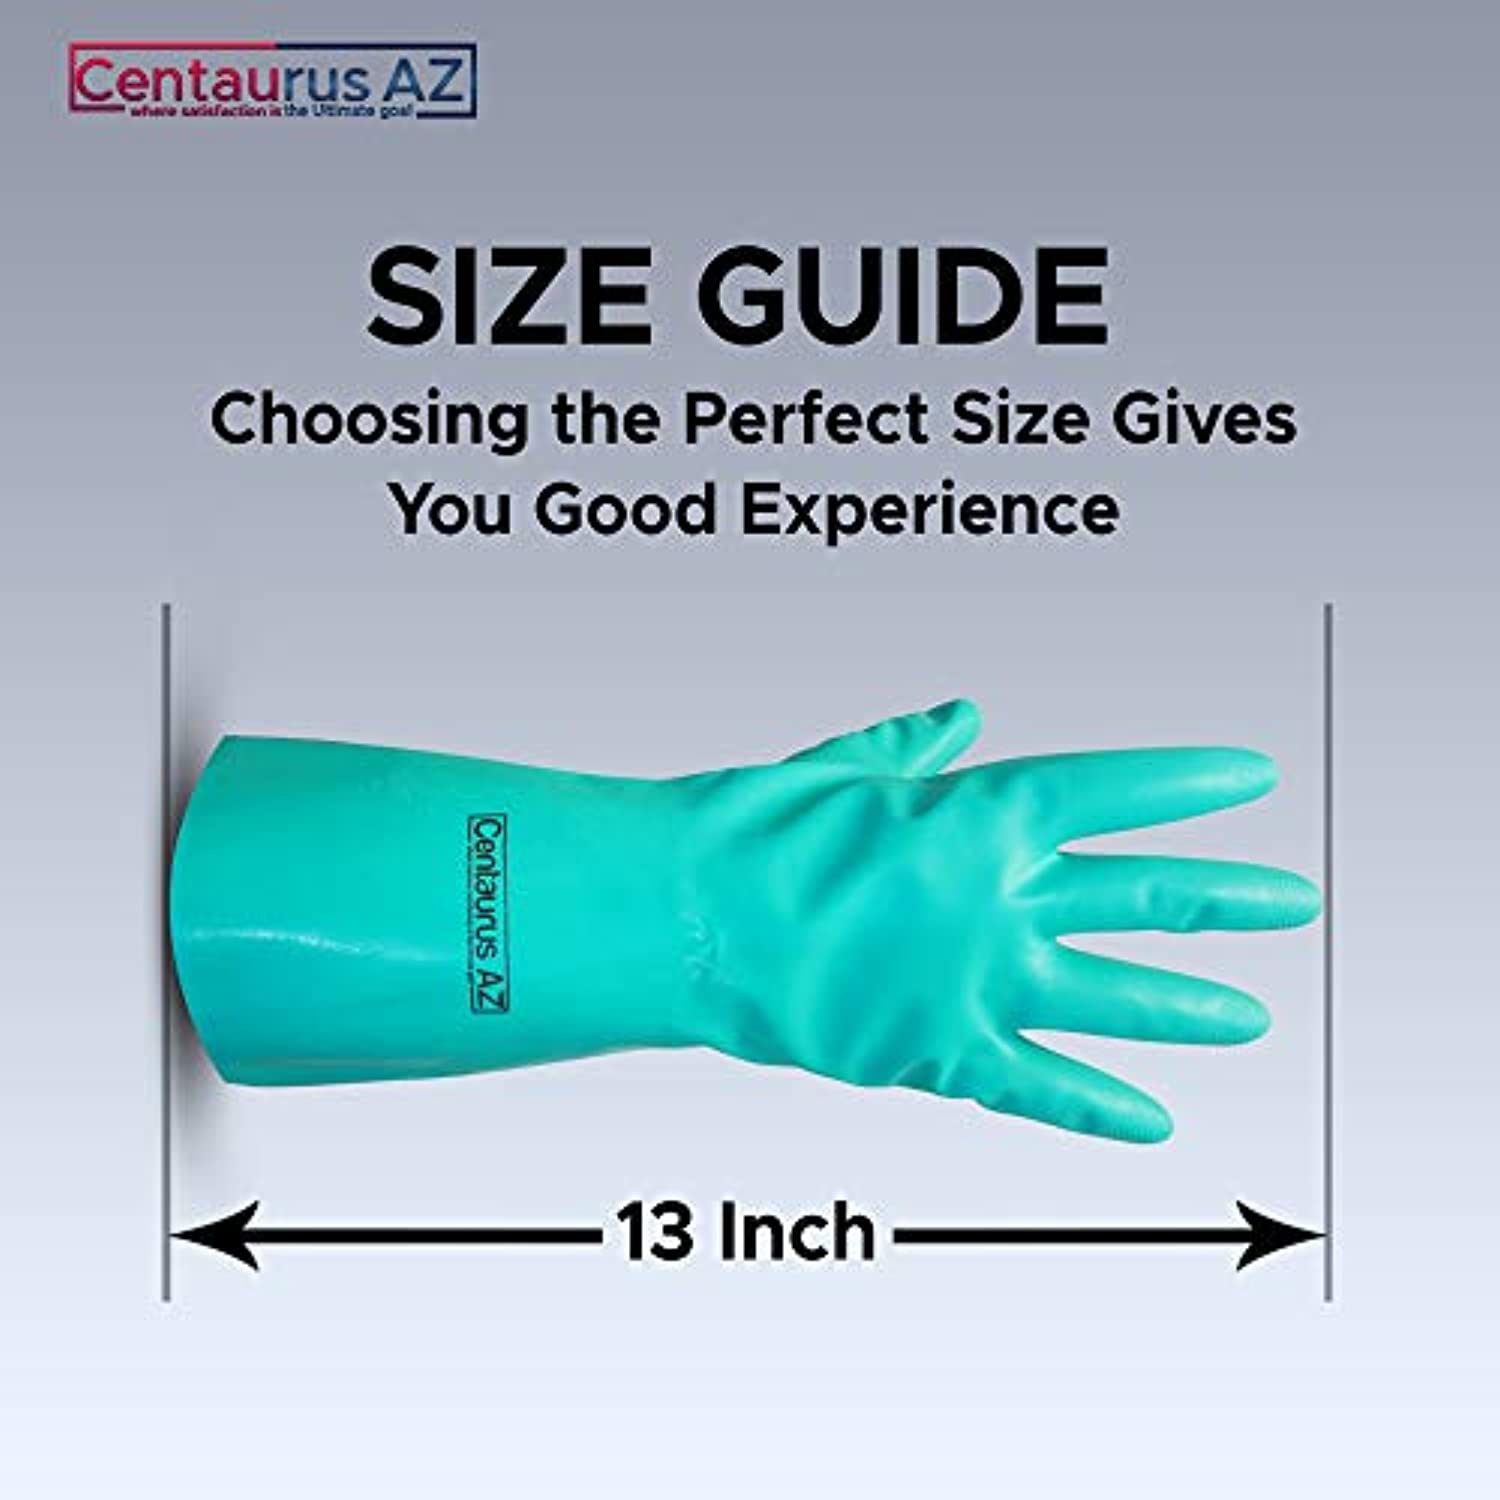 Klean-Strip VM&P Naphtha Thins Enamels & Varnish Cleans Greasy, Waxy, Oily Surfaces & Machine Parts Faster Drying Now Comes with Chemical Resistant Gloves by Centaurus AZ, 1Gal (3.785L)